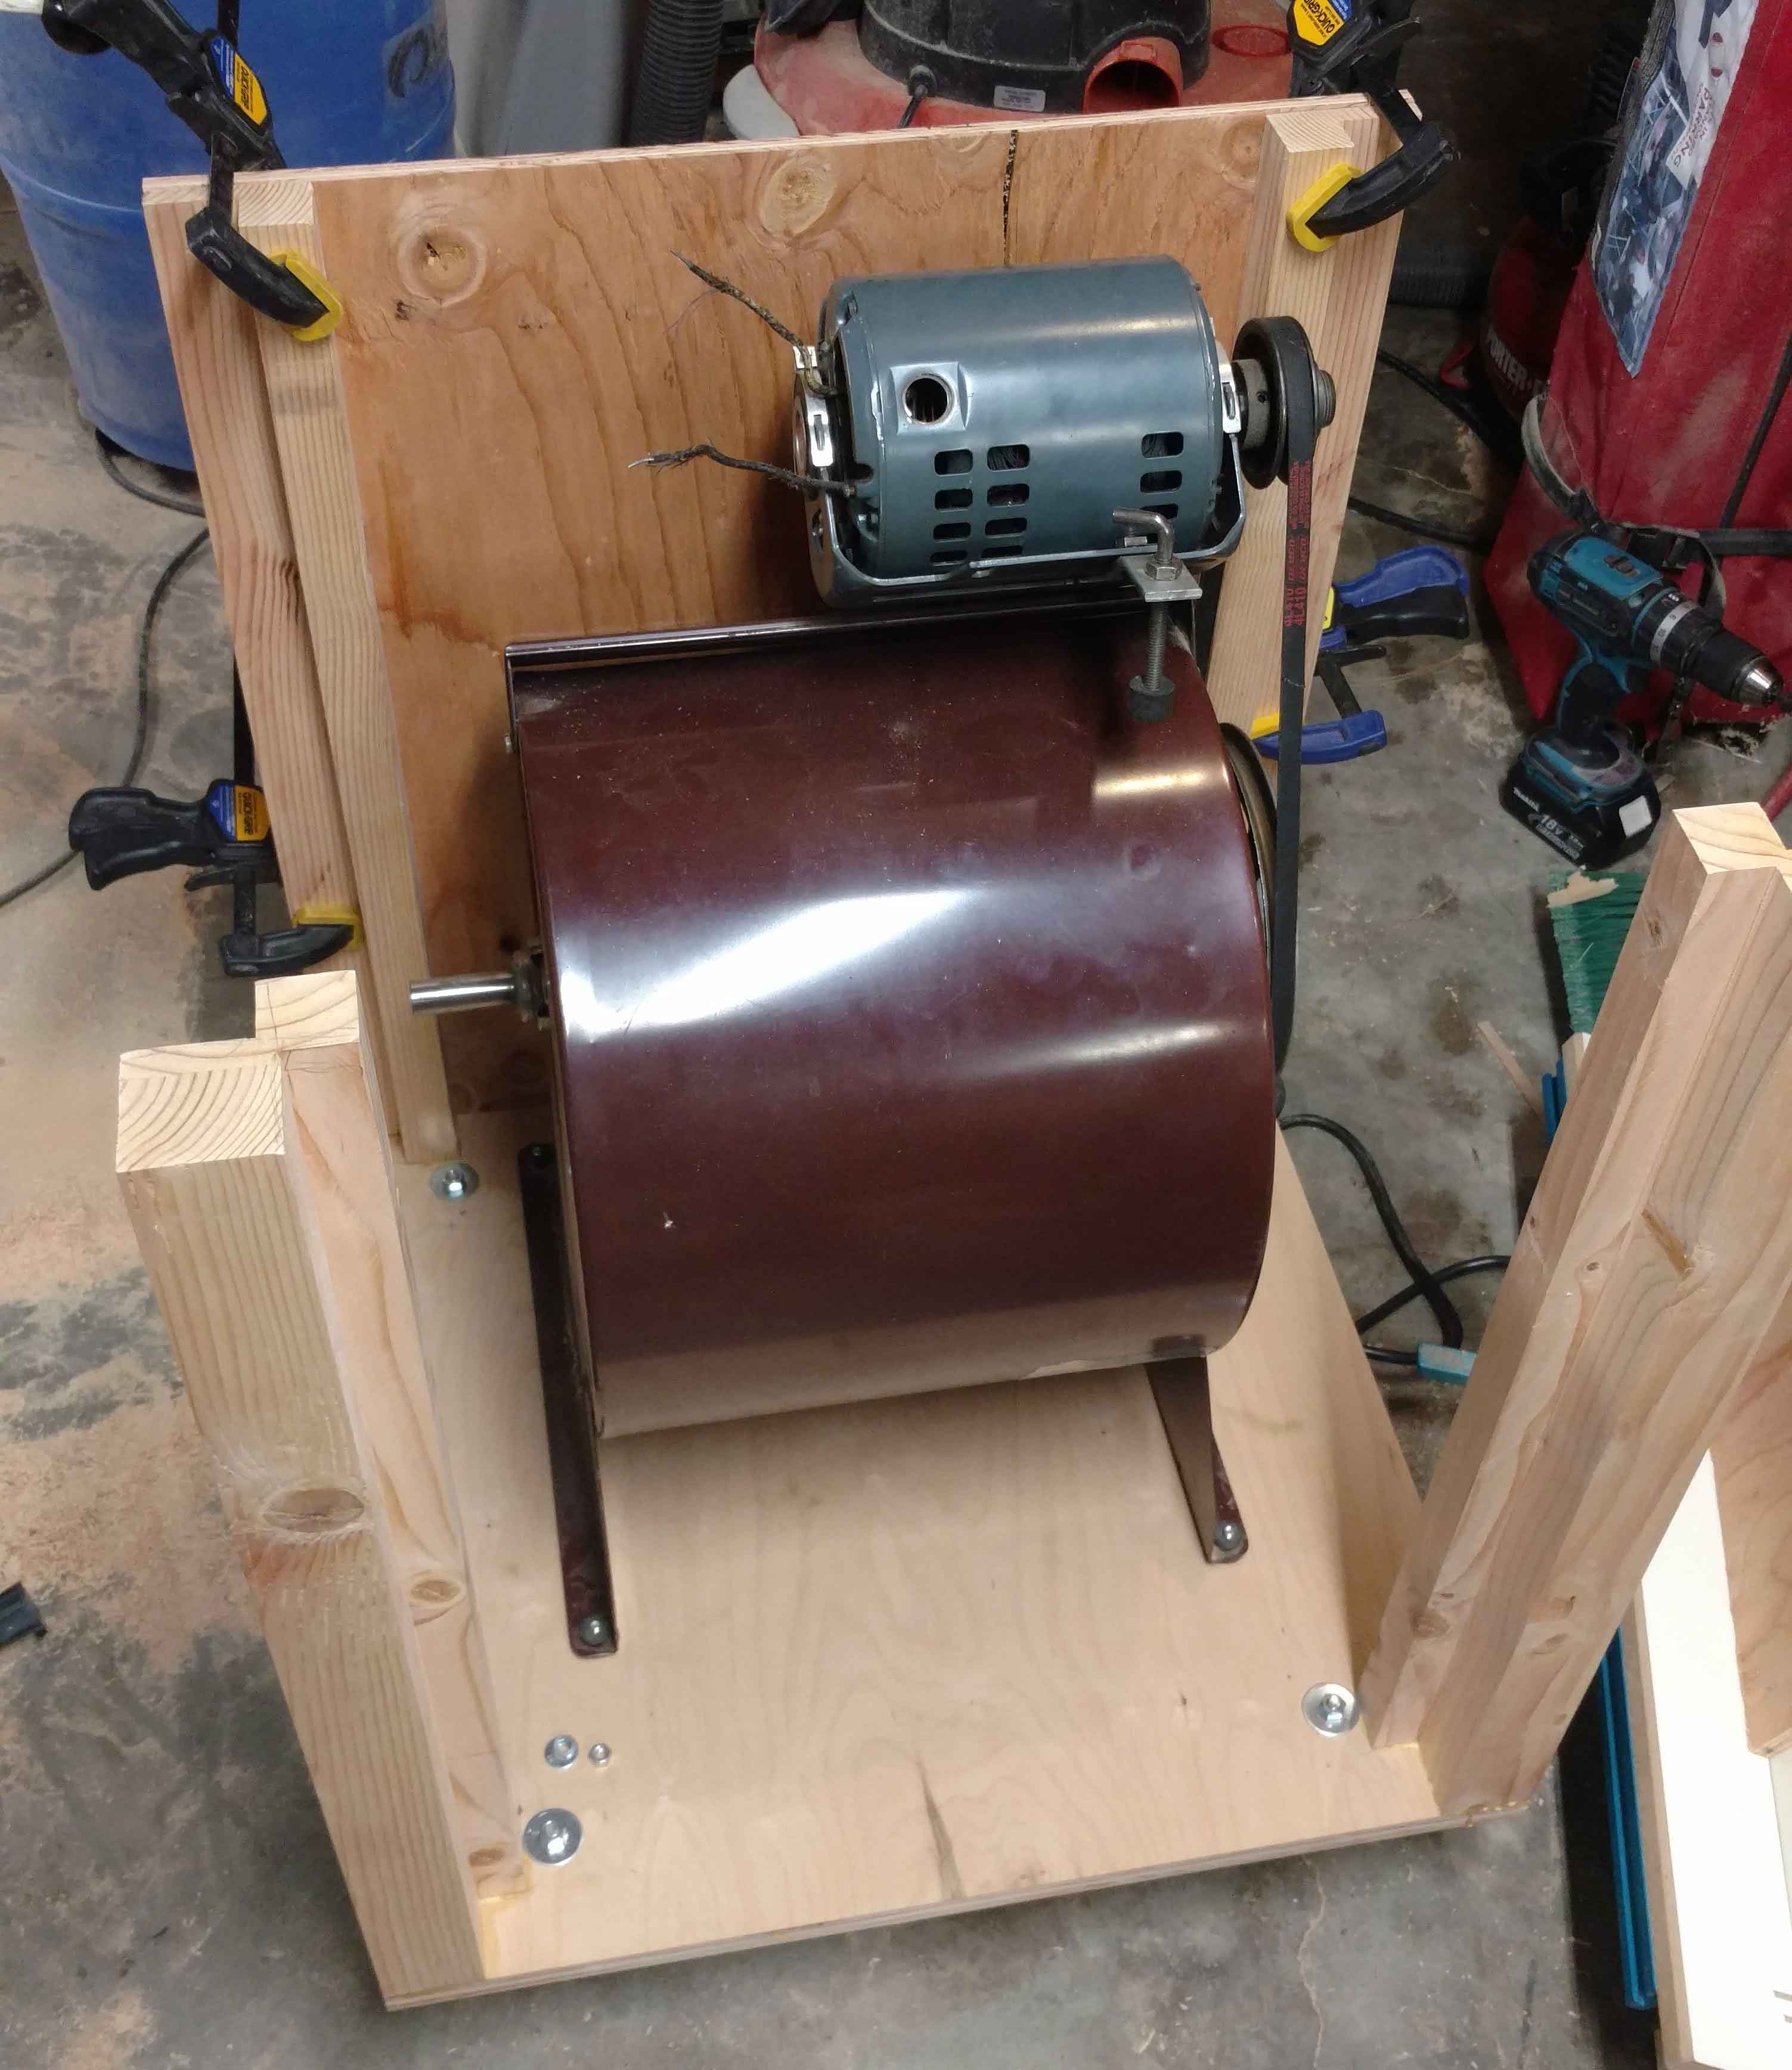 blower mounted in incomplete frame